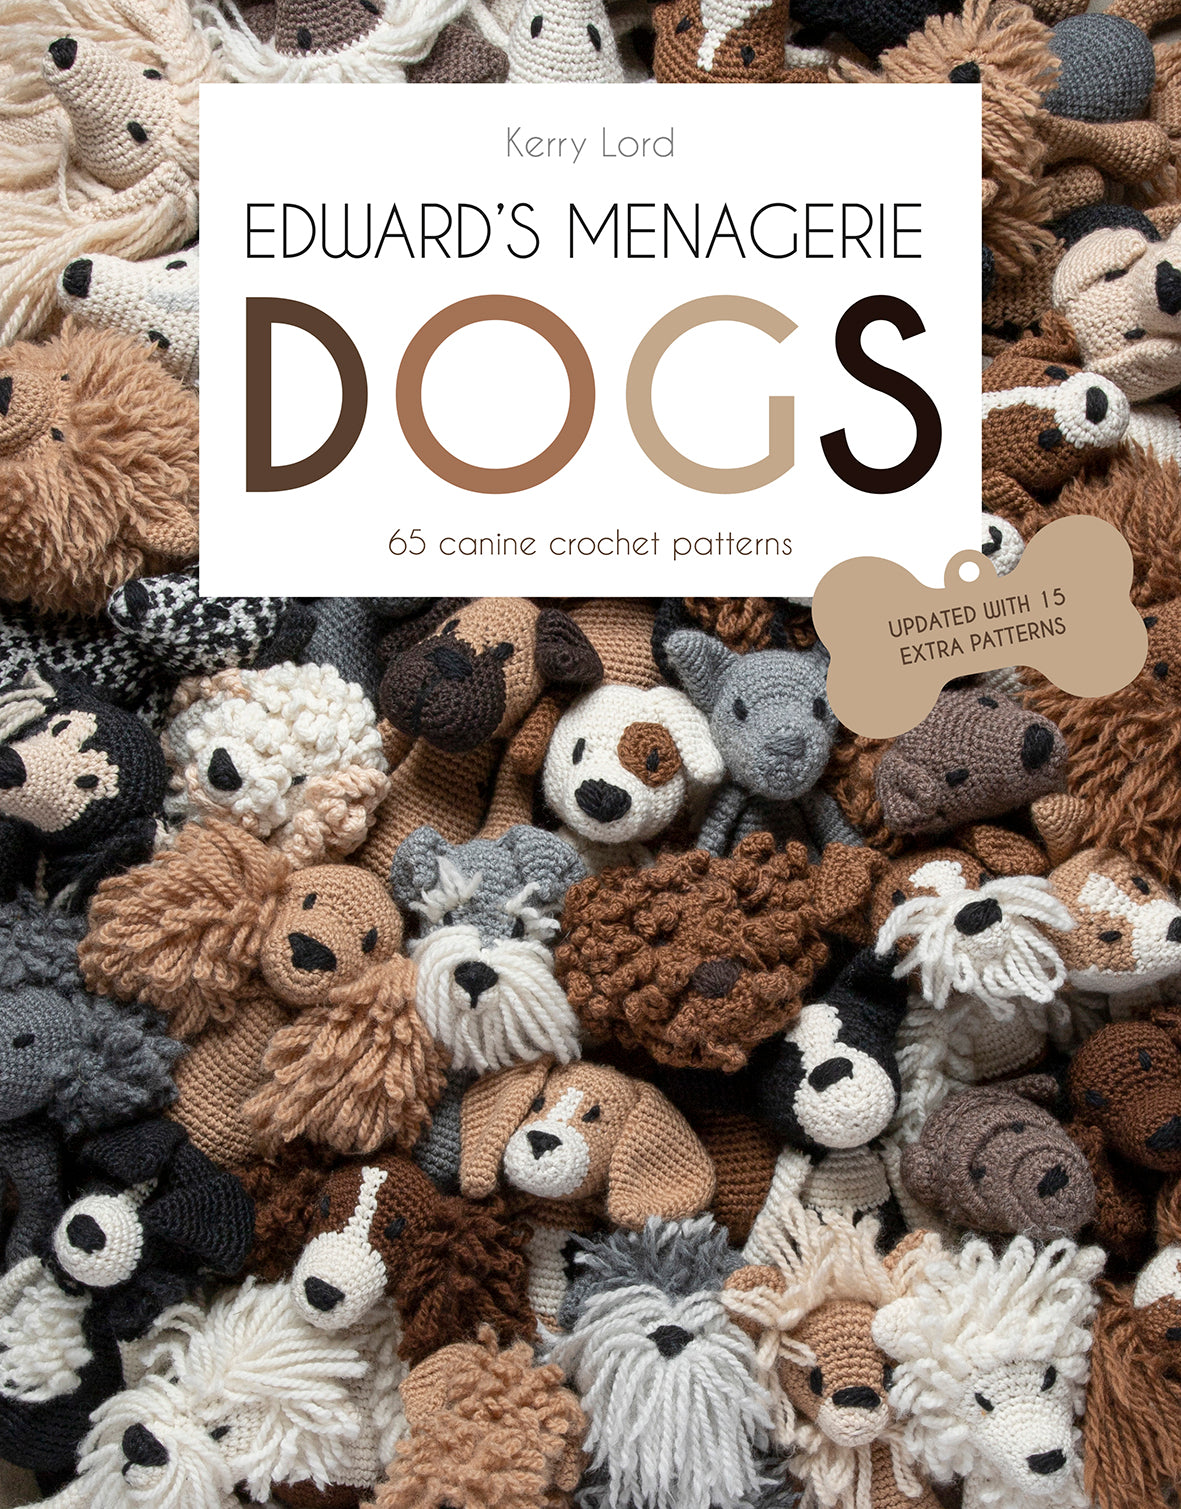 Edward's Menagerie Dogs | Kerry Lord